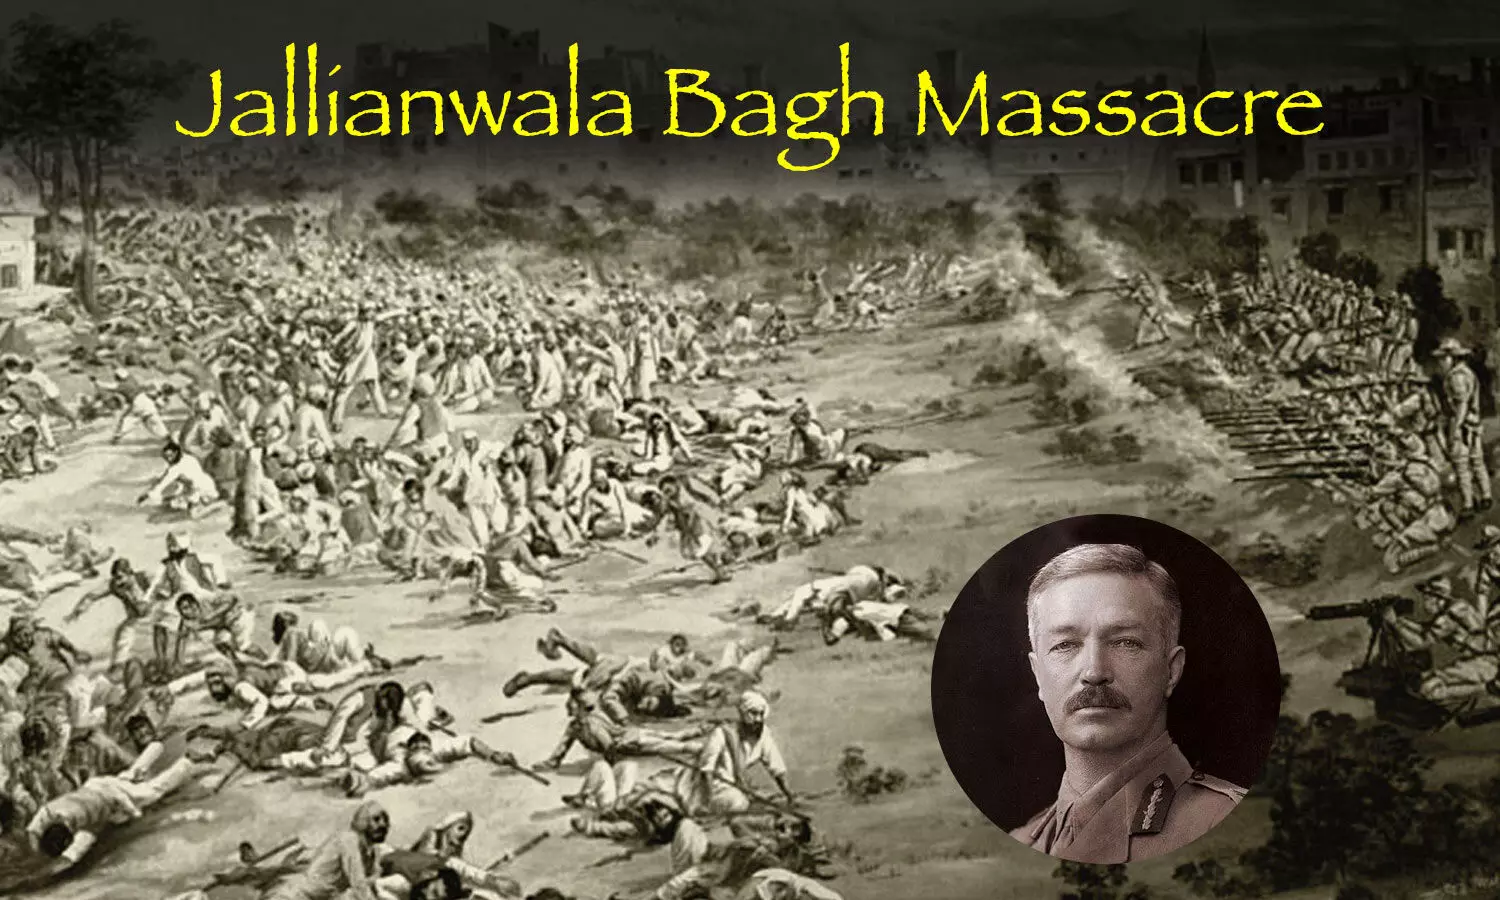 Reflecting on the 105th Anniversary - The Significance of the Jallianwala Bagh Massacre in Indias Fight for Independence